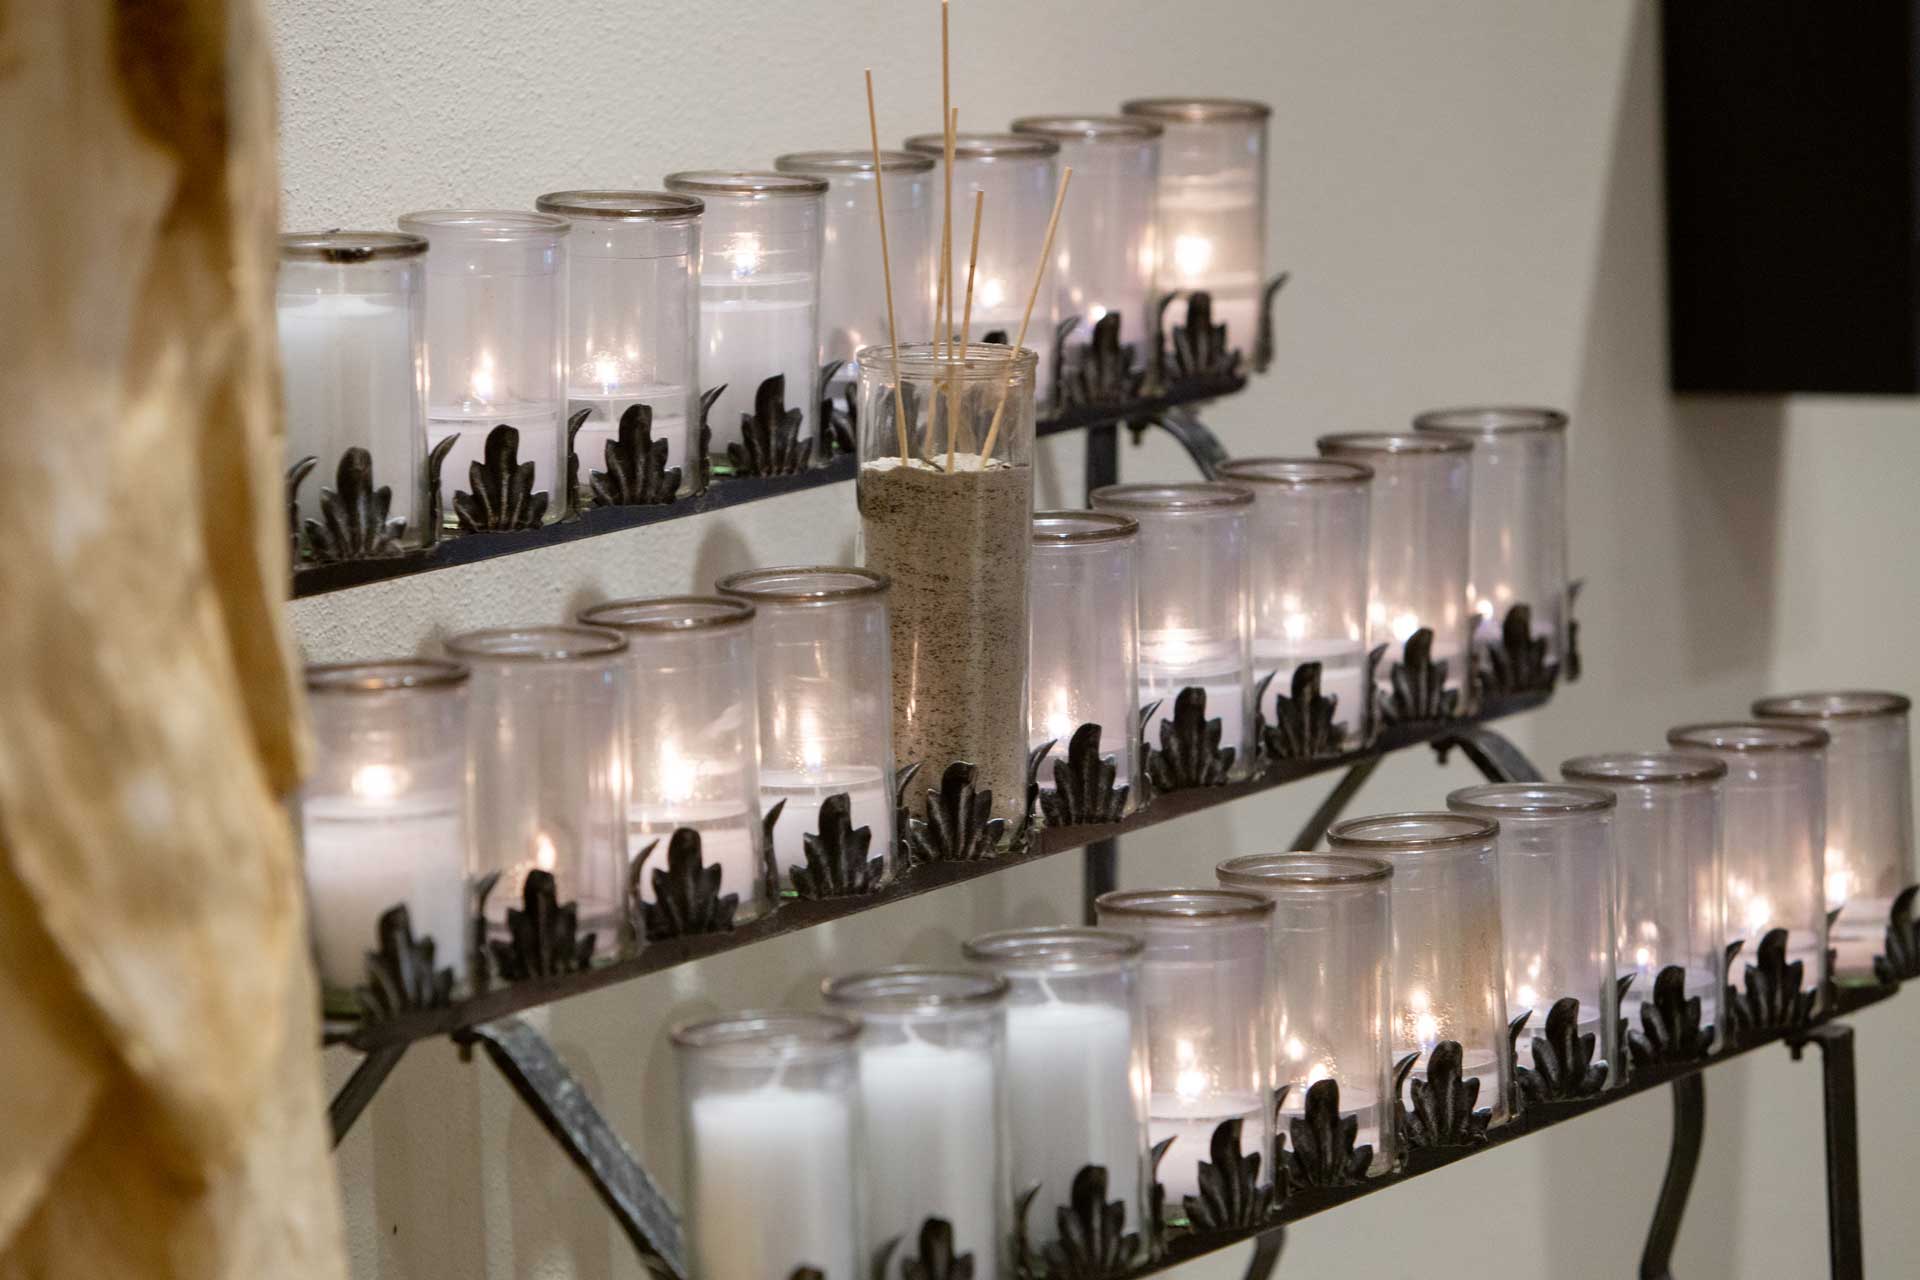 Display with lit candles and incense.